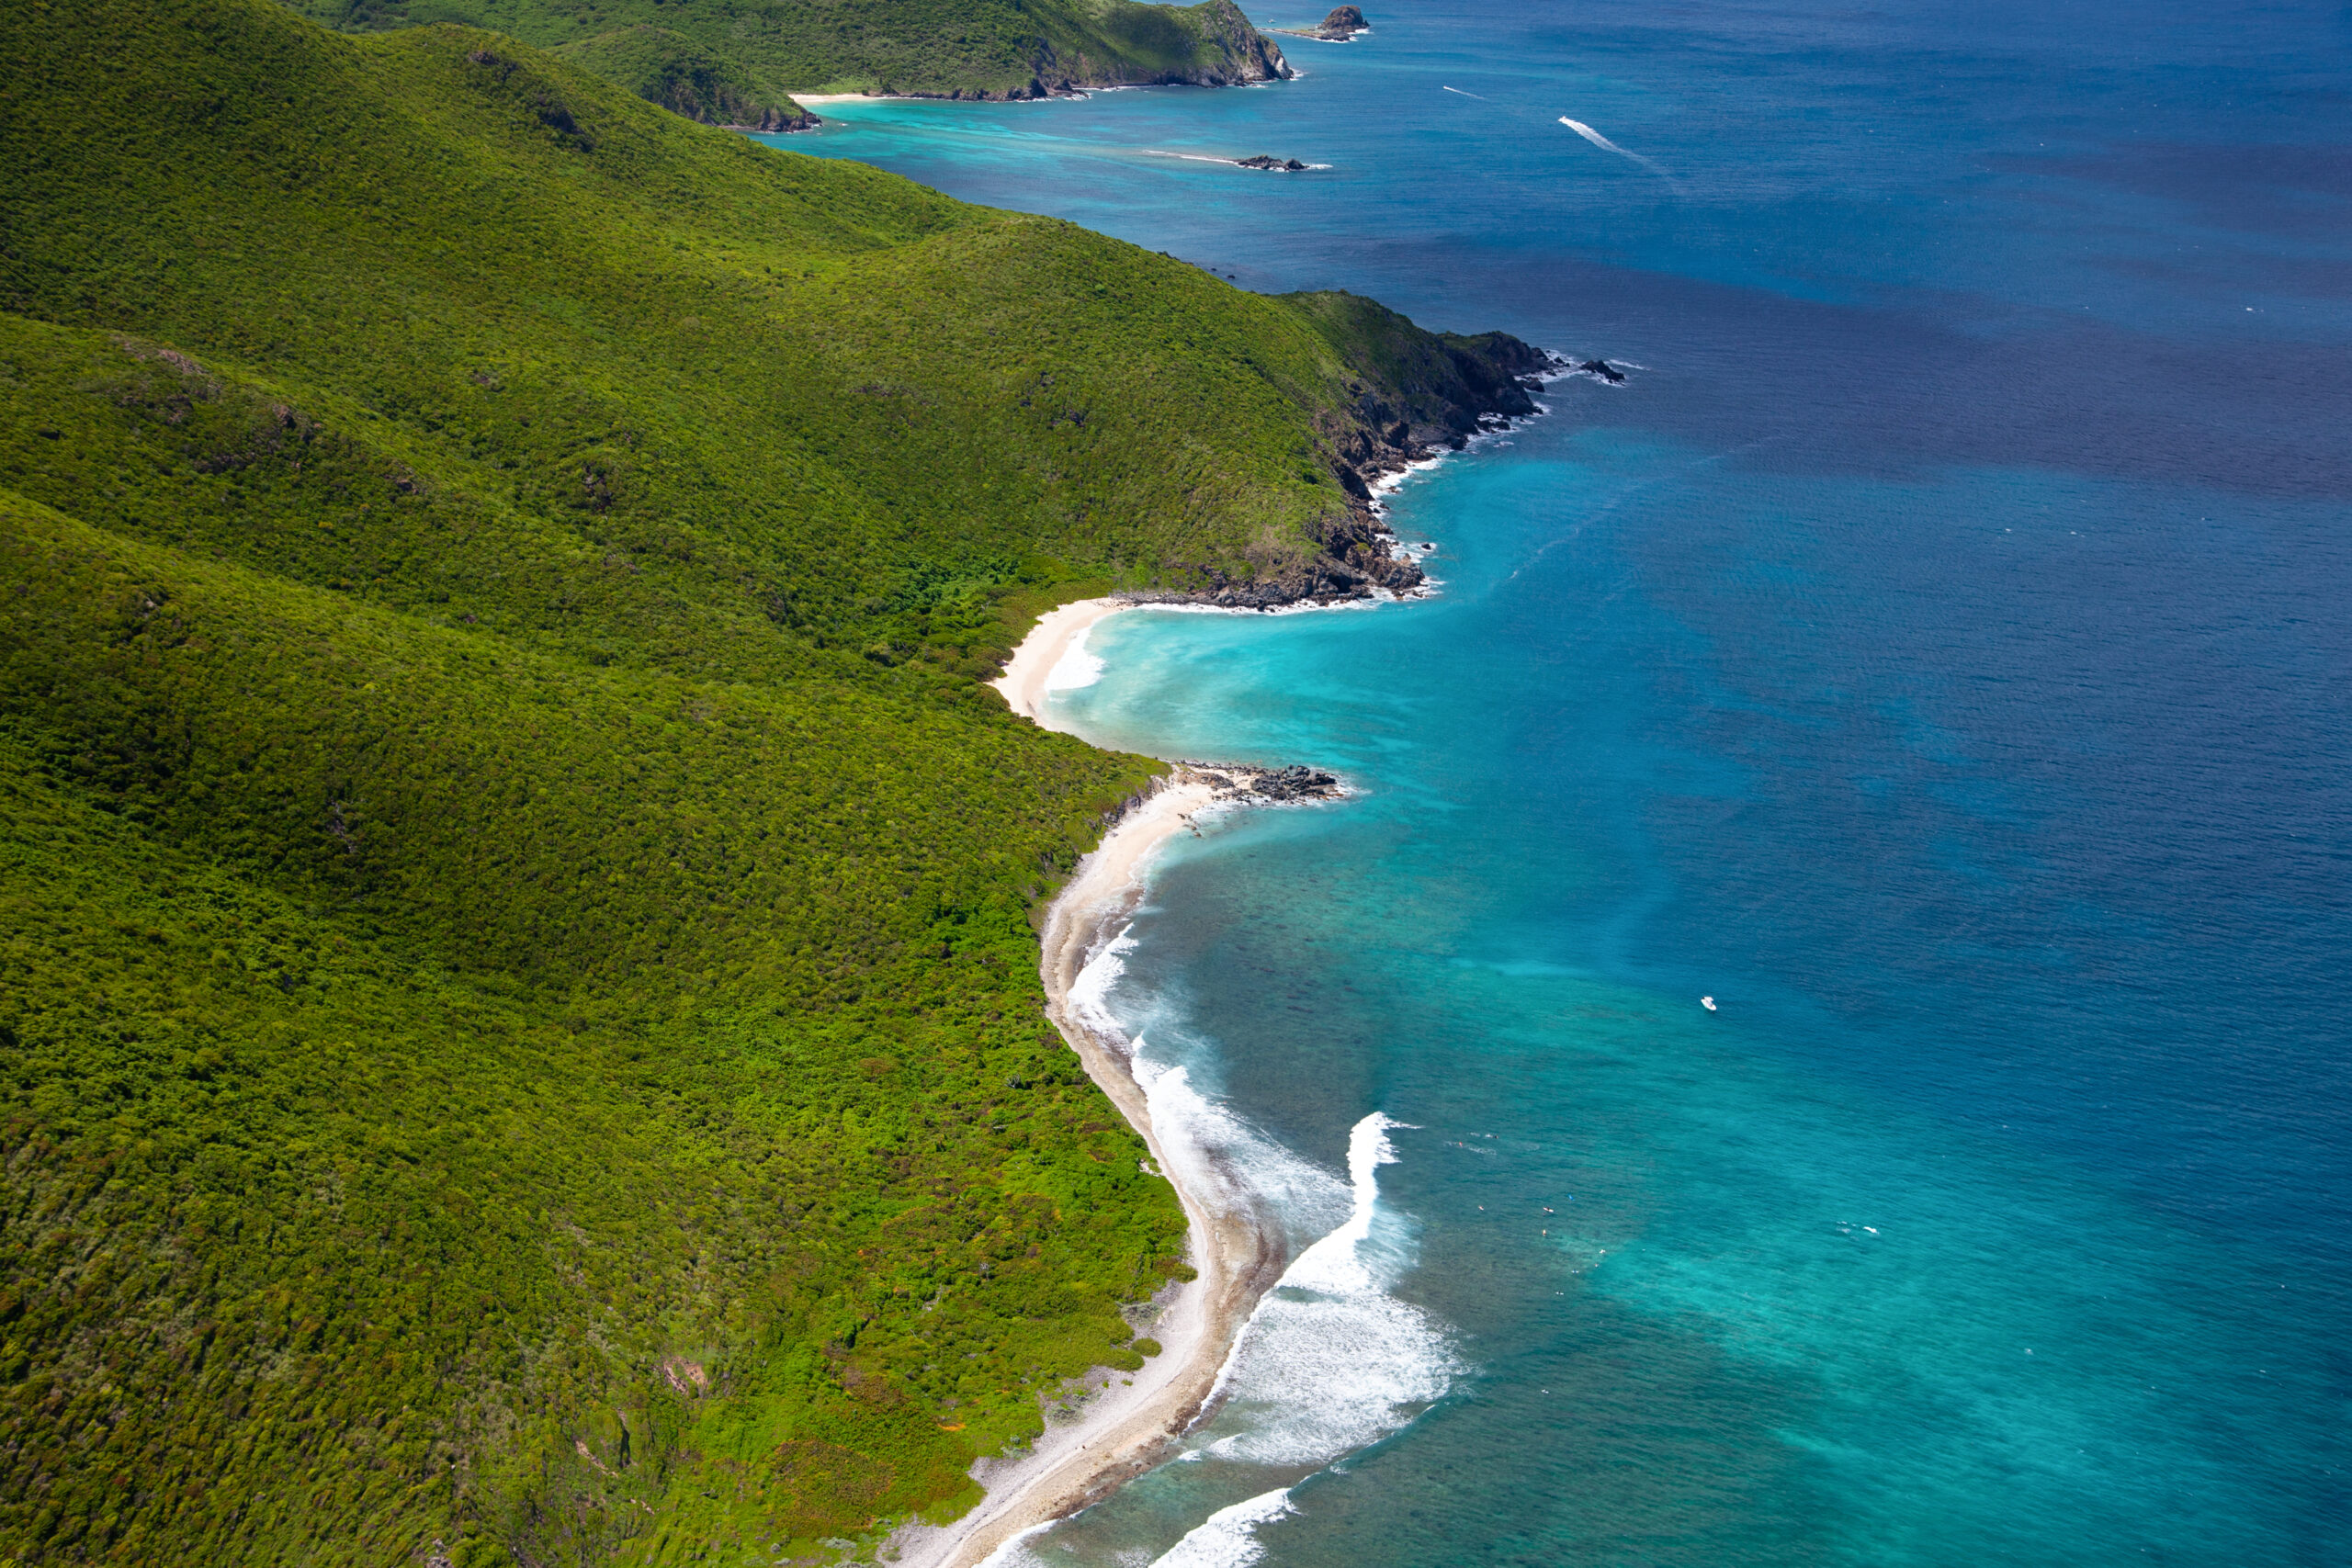 A aerial shot of the beach of Sint Maarten. Forested hills slope down to the ocean.